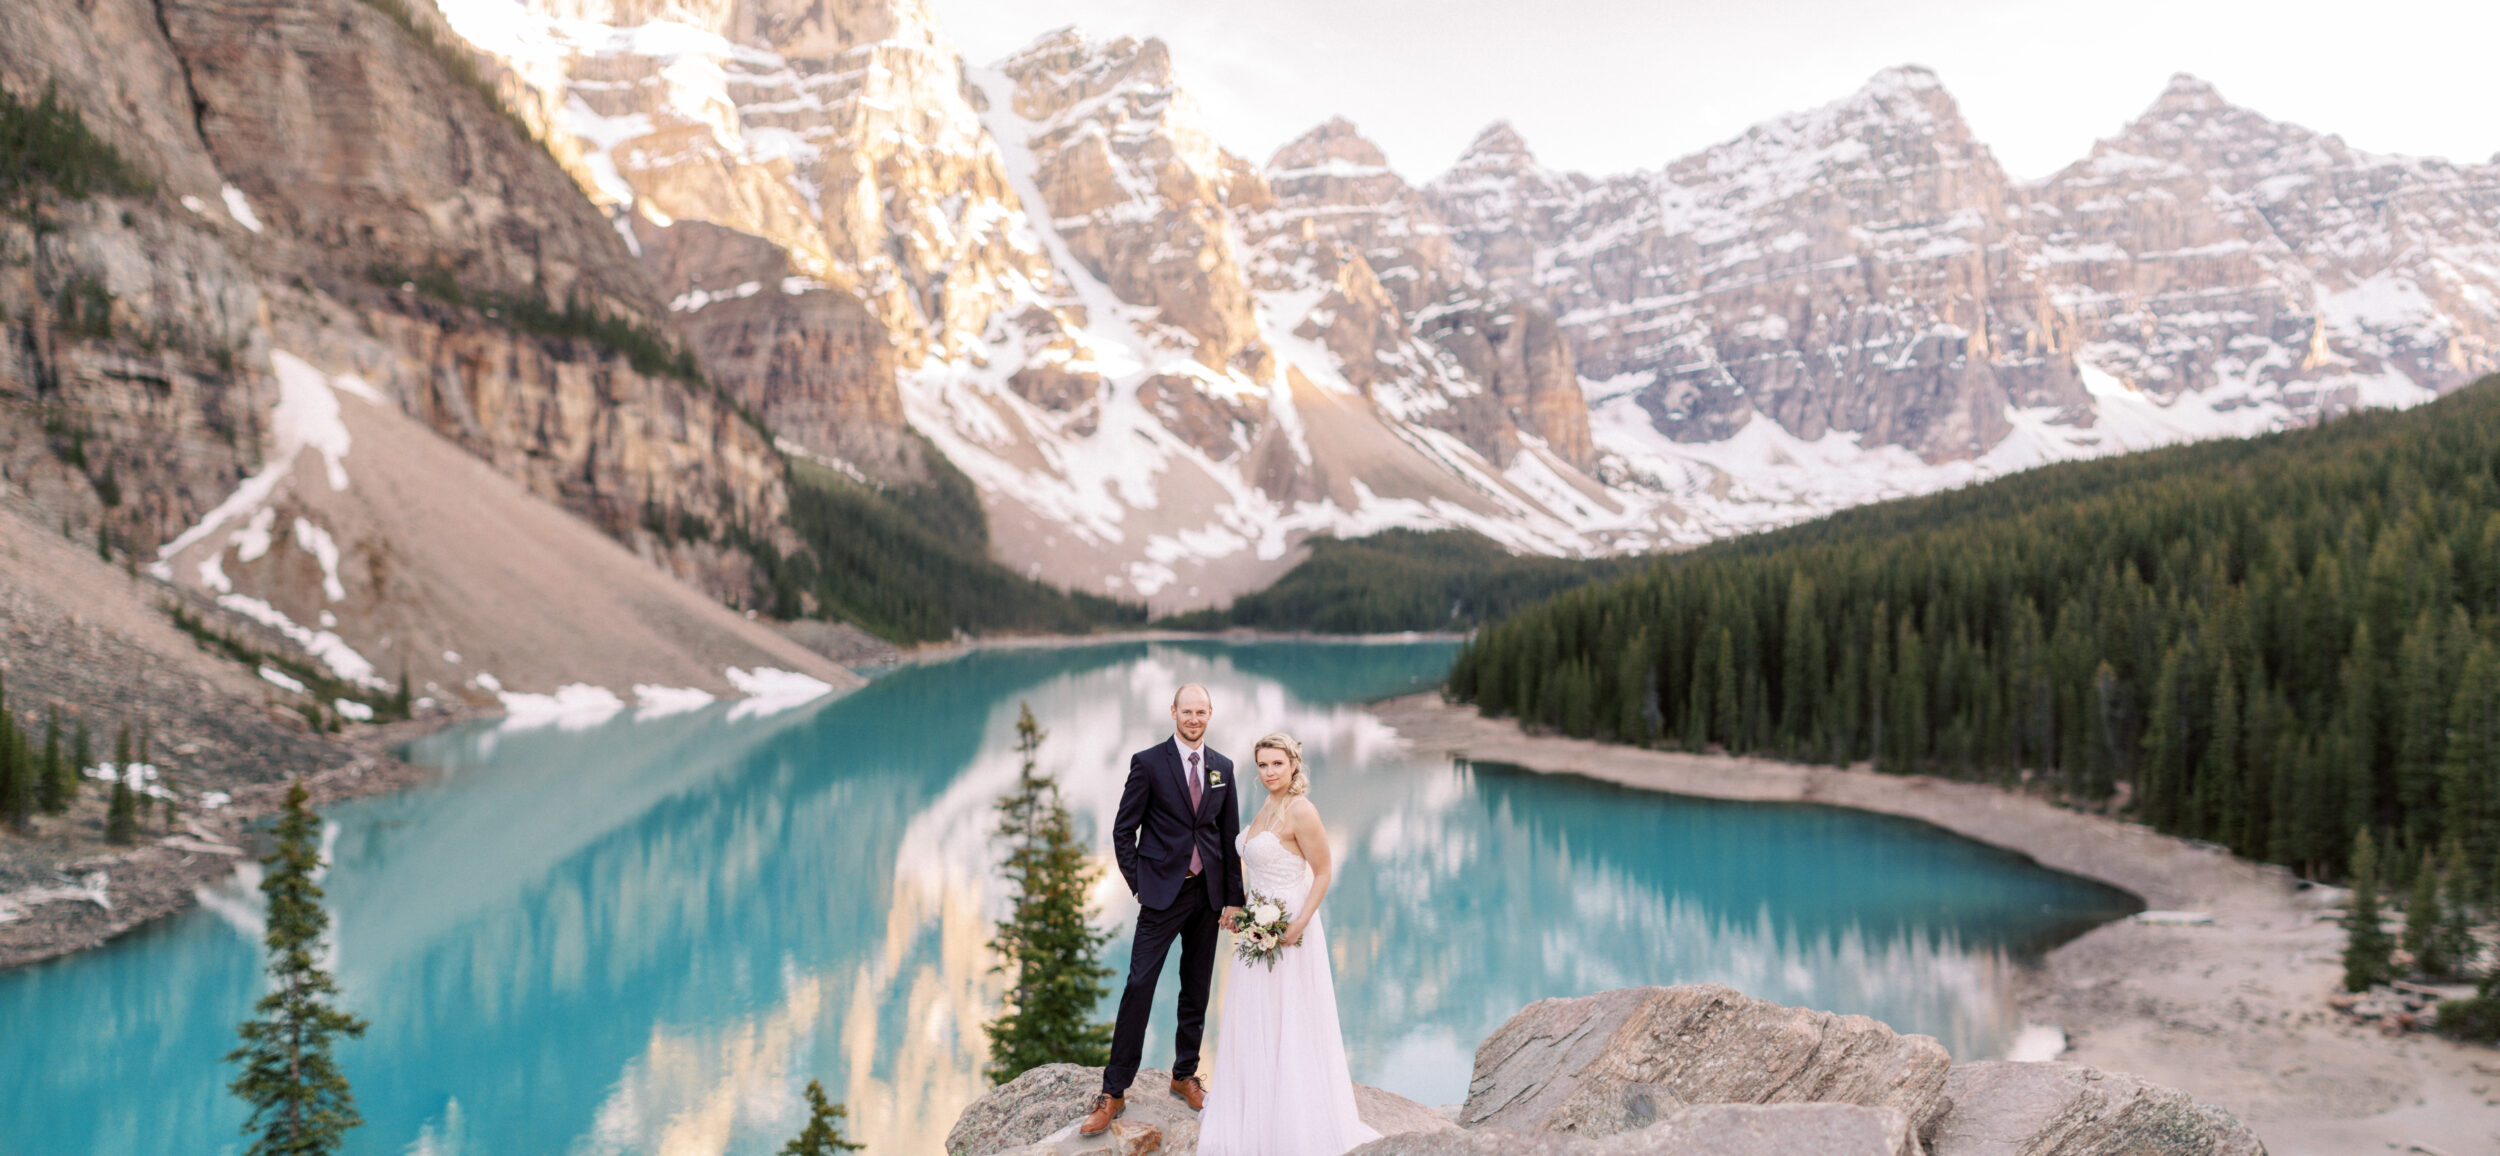 Moraine Lake is one of the 8 best photography locations in Banff